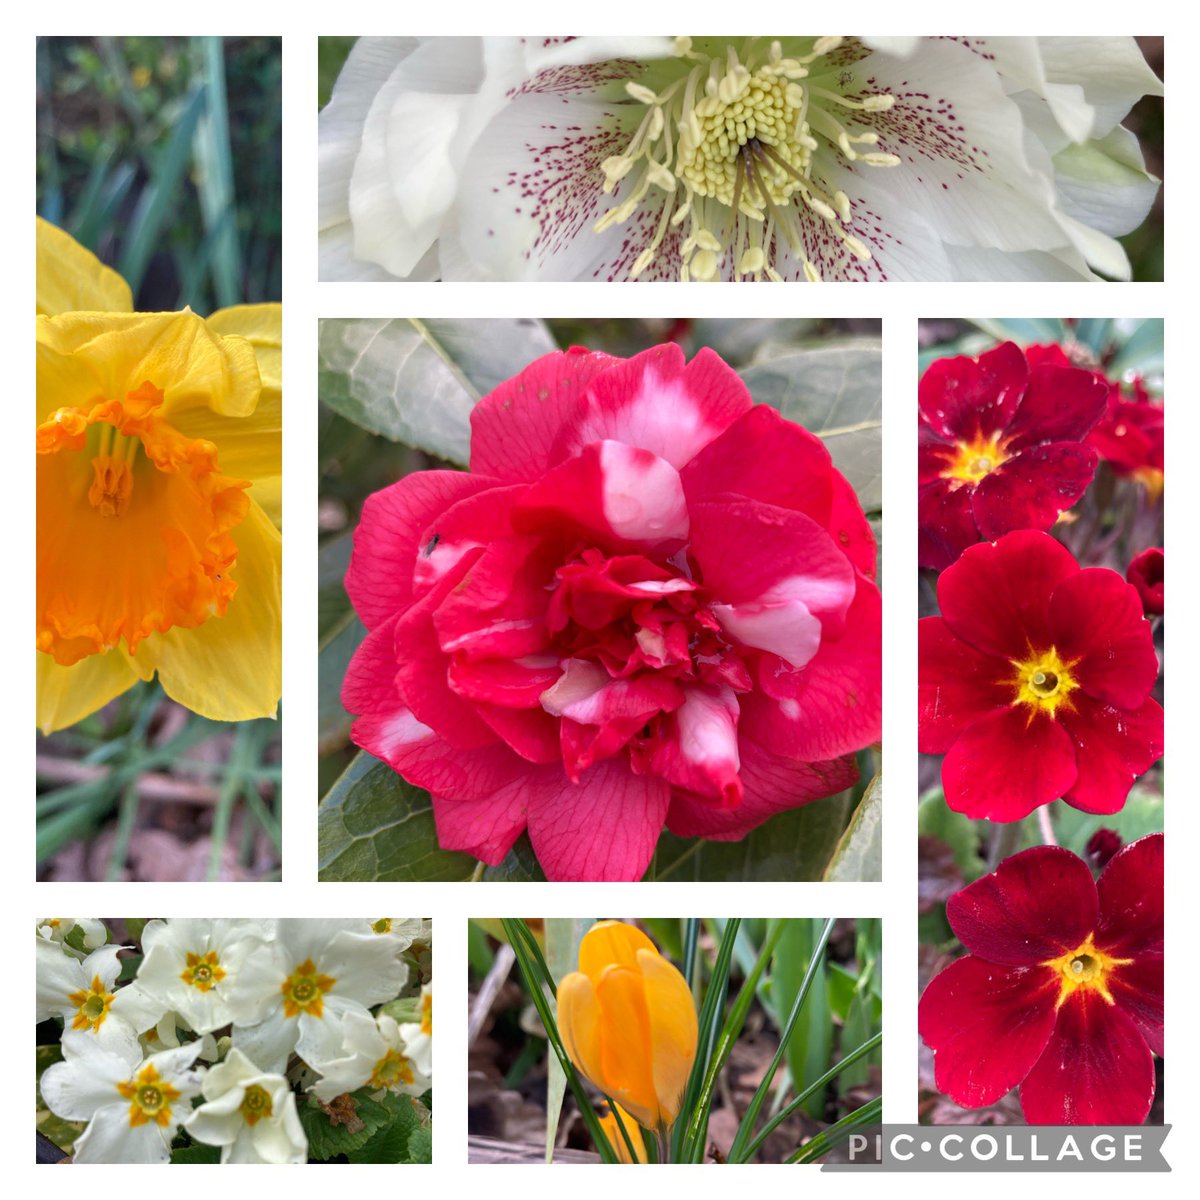 The brilliant @patmarsh back on the radio Sunday from 10 on @BBCRadioKent with your #gardening questions from 1030. Email now sunday.gardening@bbc.co.uk Meantime a joyful #sixonsaturday